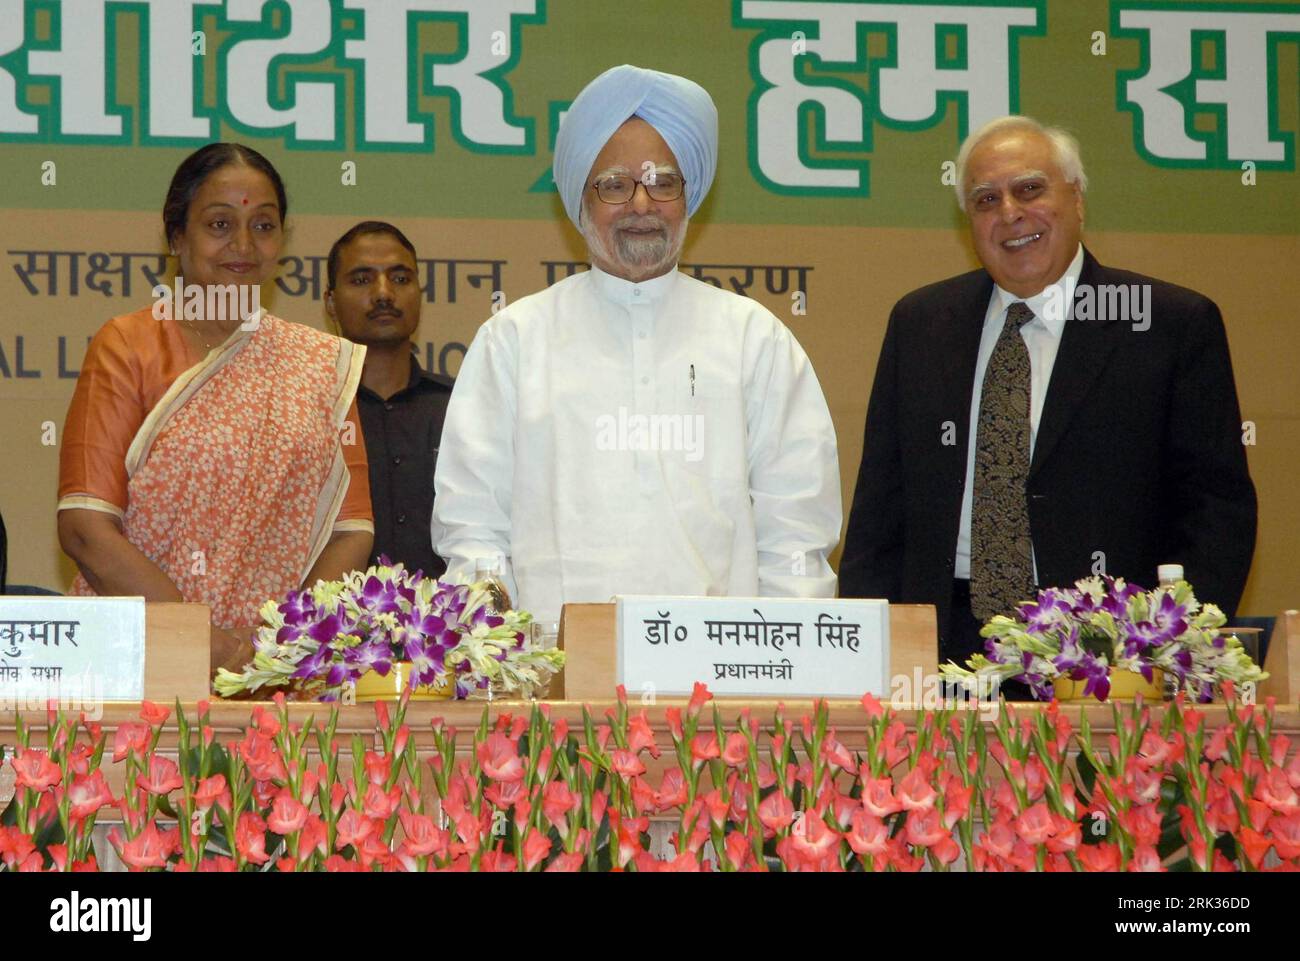 Bildnummer: 53331714  Datum: 08.09.2009  Copyright: imago/Xinhua (090908) -- NEW DELHI, Sept. 8, 2009 (Xinhua) -- Indian Prime Minister Manmohan Singh (C), Meira Kumar (L), the speaker of India s lower house of parliament or Lok Sabha, and Kapil Sibal (R), the minister for human resource development attend the ceremony to commemorate the International Literacy Day in New Delhi, capital of India, on Sept. 8, 2009. (Xinhua/Stringer) (cy) (1)INDIA-NEW DELHI-LITERACY DAY PUBLICATIONxNOTxINxCHN People Politik kbdig xkg 2009 quer     Bildnummer 53331714 Date 08 09 2009 Copyright Imago XINHUA  New De Stock Photo